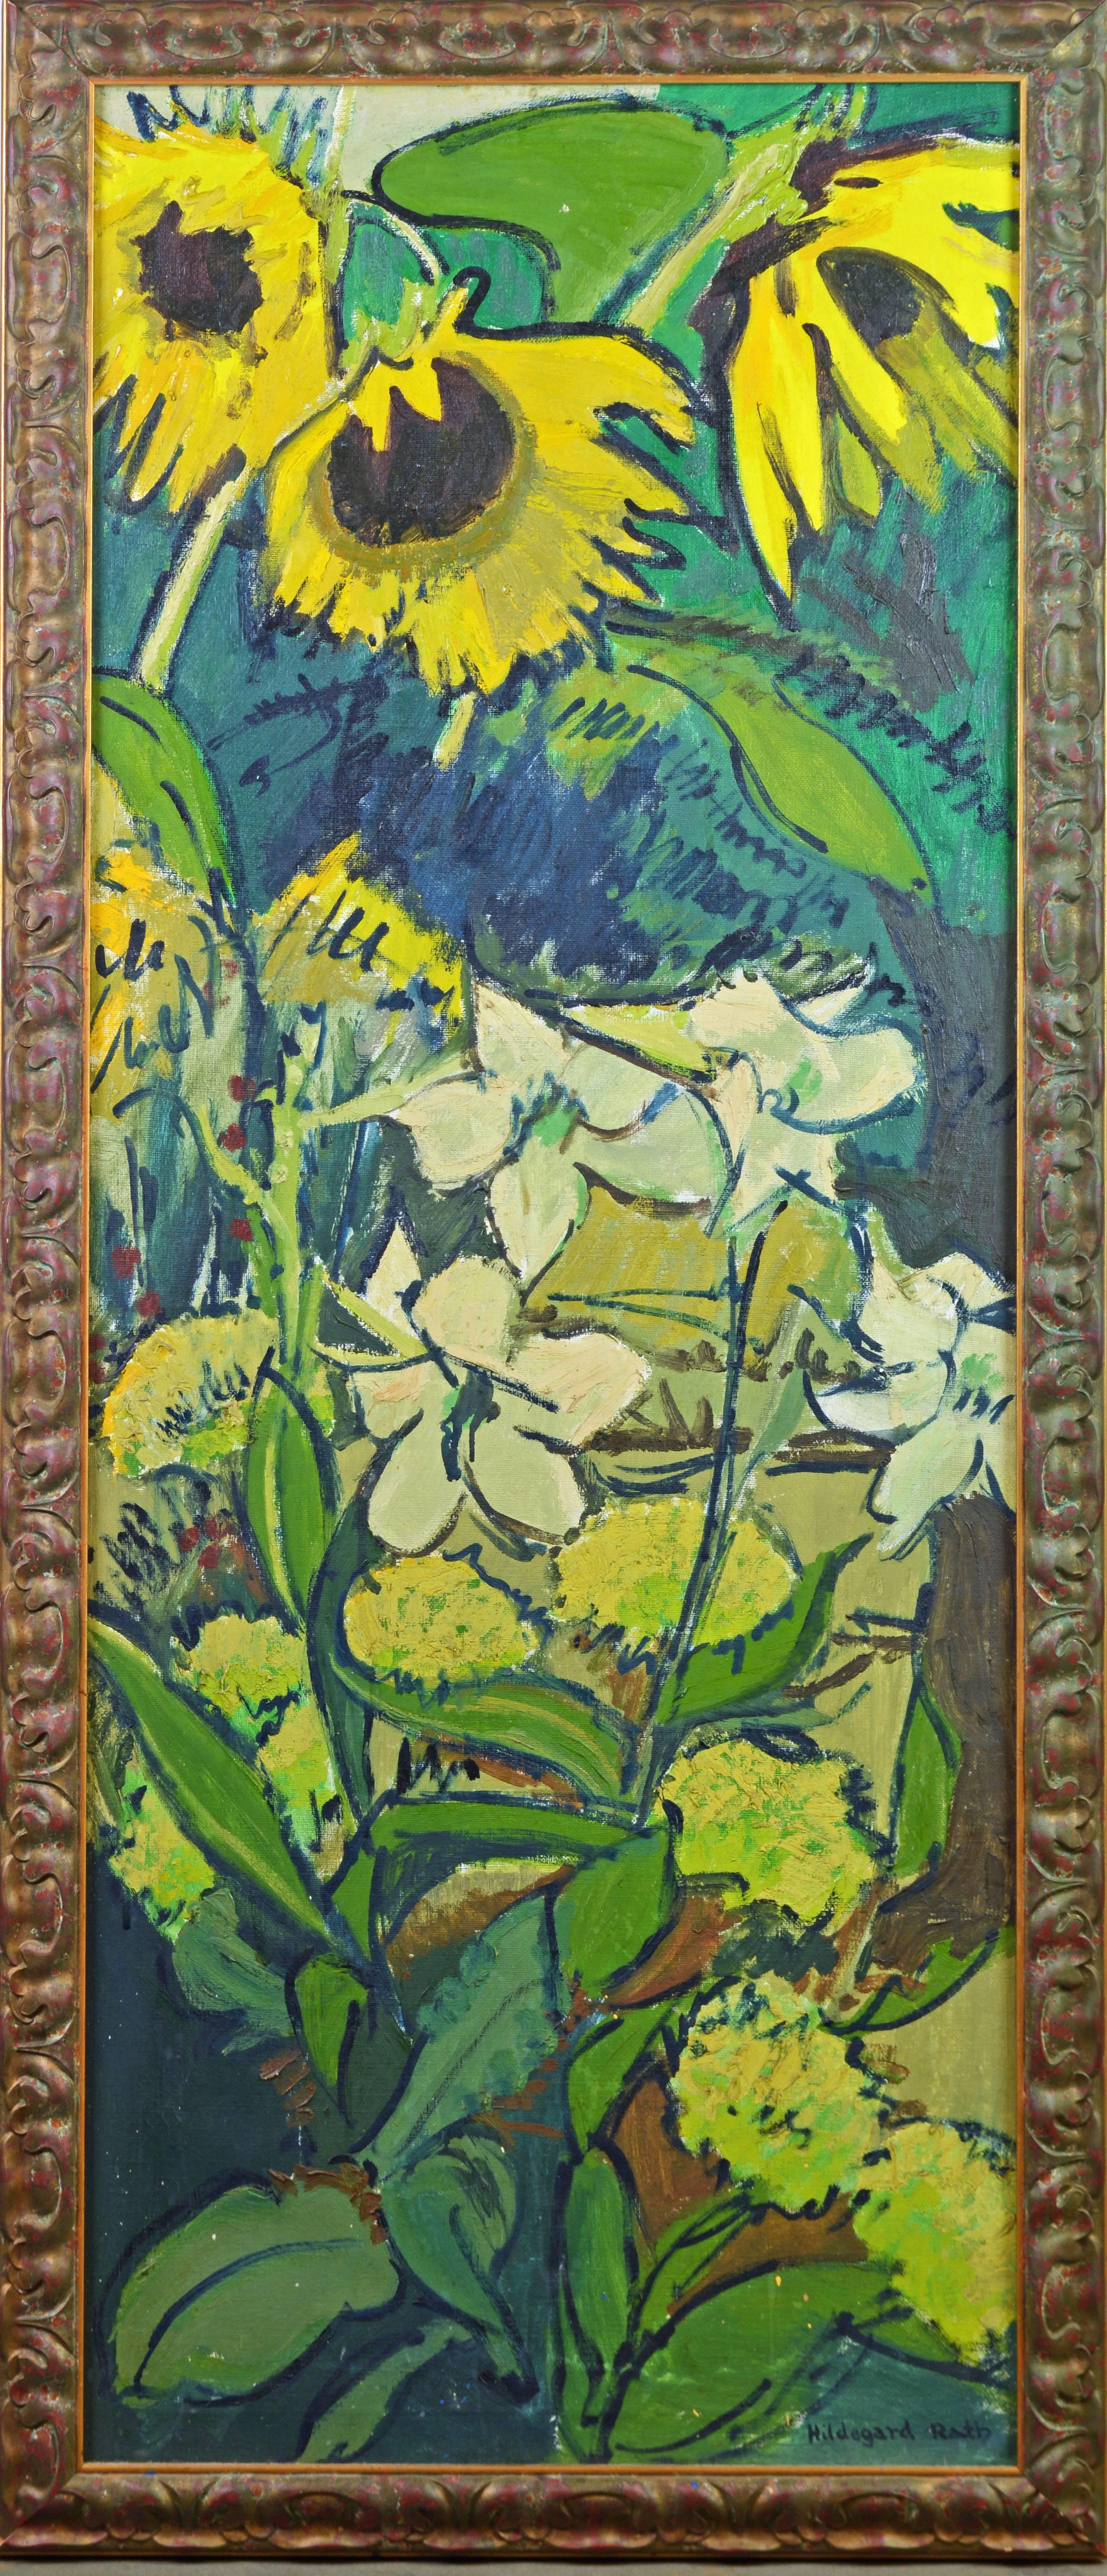 'Sunflowers in the Garden'
by Hildegard Rath, German/American 1909-1994.
Measures: 22 x 56 in. without frame, 26 x 60 in. including frame.
Oil on canvas, signed.
Housed in the likely original antiqued gold finish frame.

Hildegard Rath:
Born